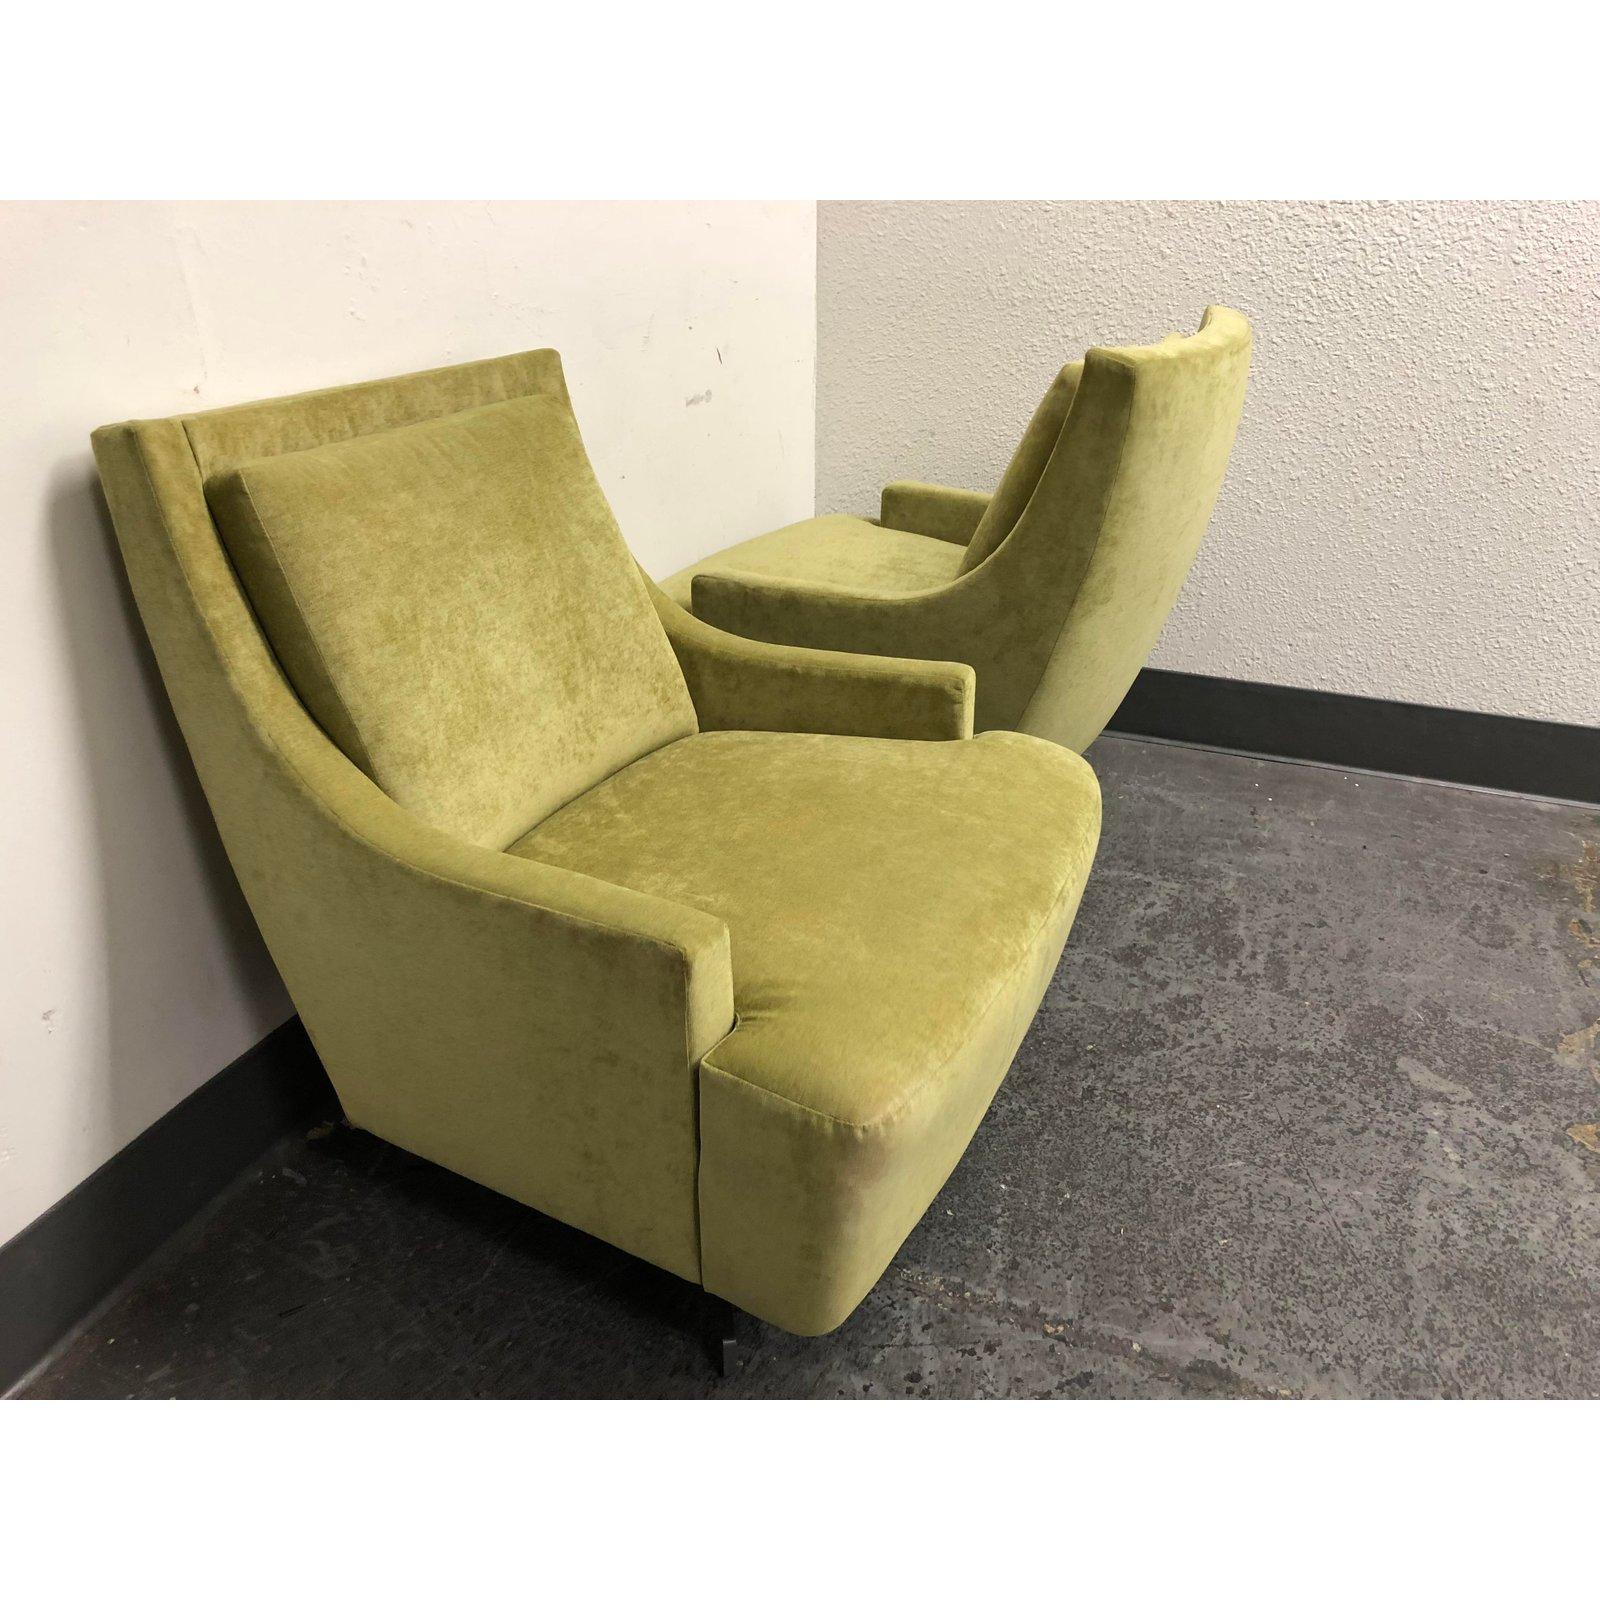 Modern Pair of H B F Barbara Barry Pastel Green Upholstered Scoop Chairs For Sale